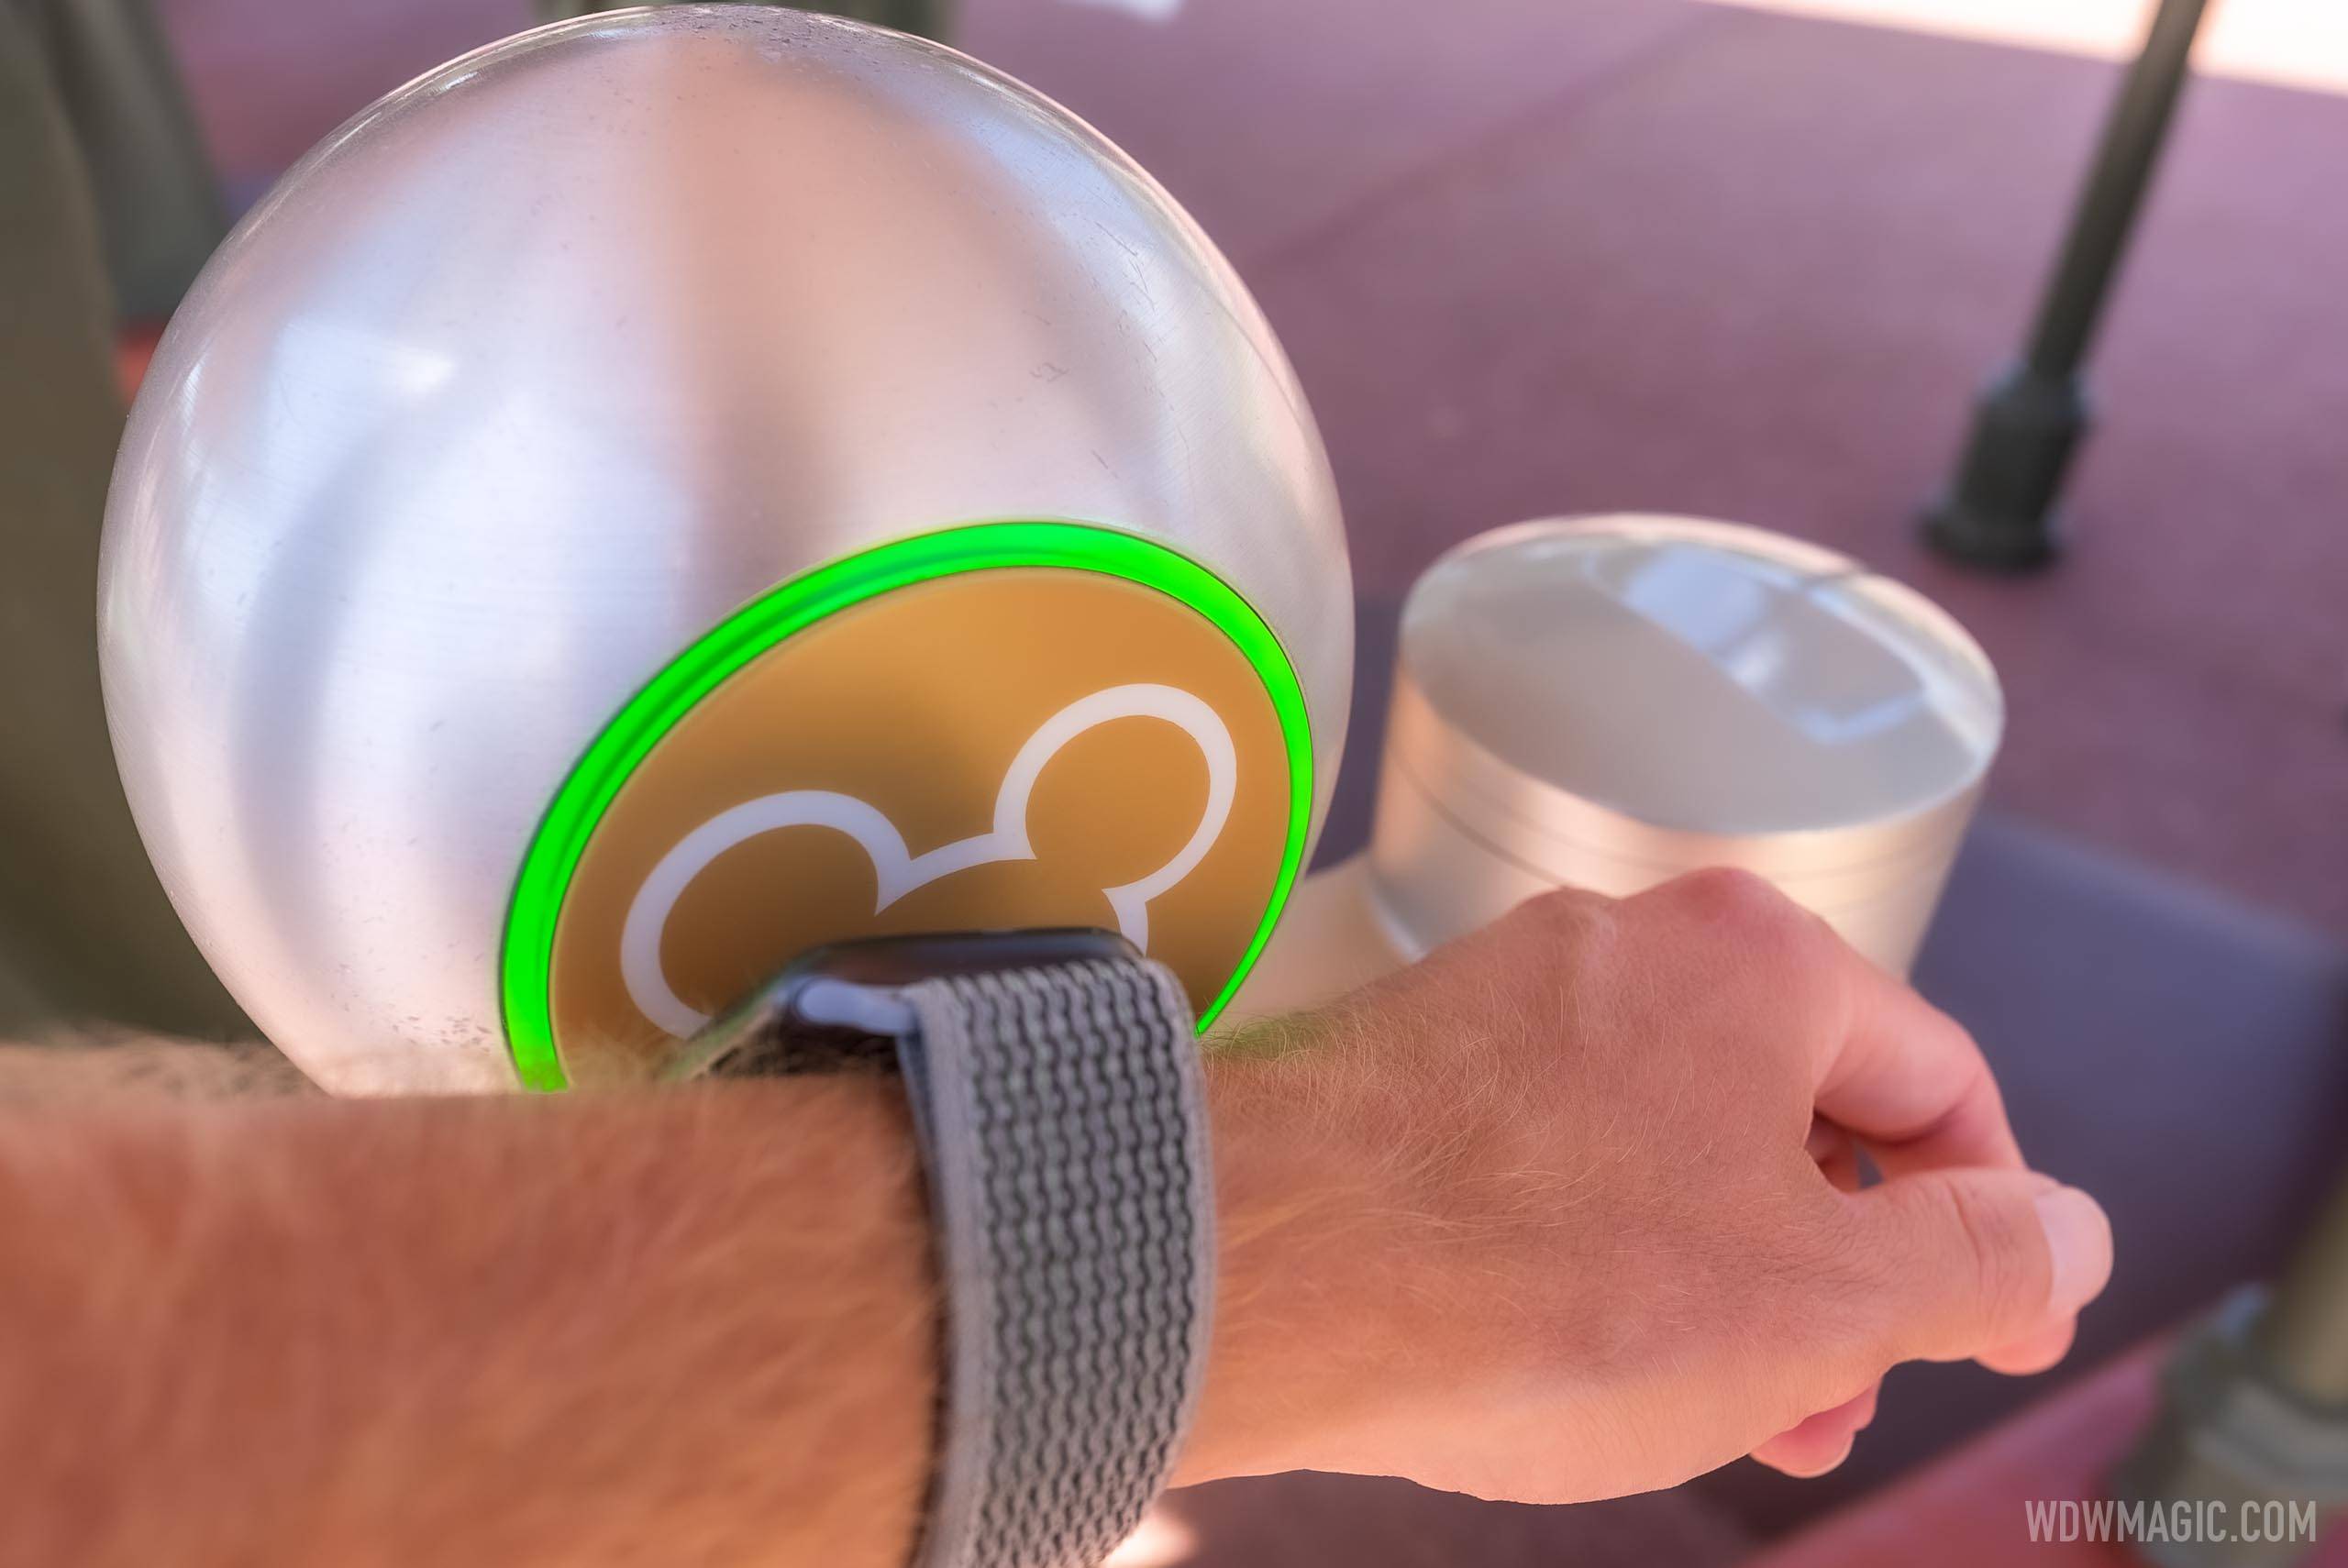 Apple Watch being used at the entrance to Magic Kingdom